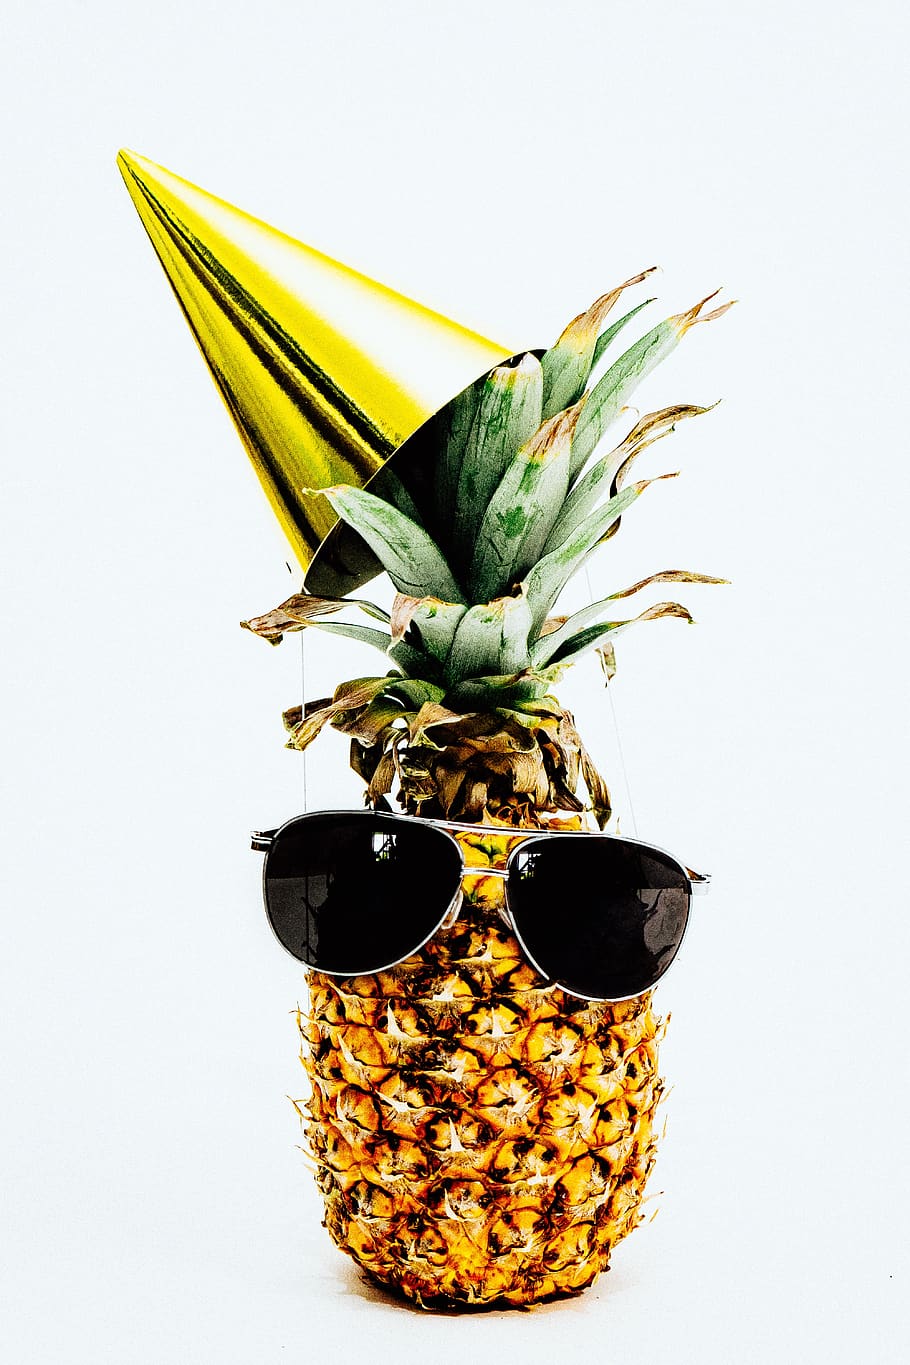 Photo Of Pineapple Wearing Black Aviator Style Sunglasses And Party Hat, HD wallpaper